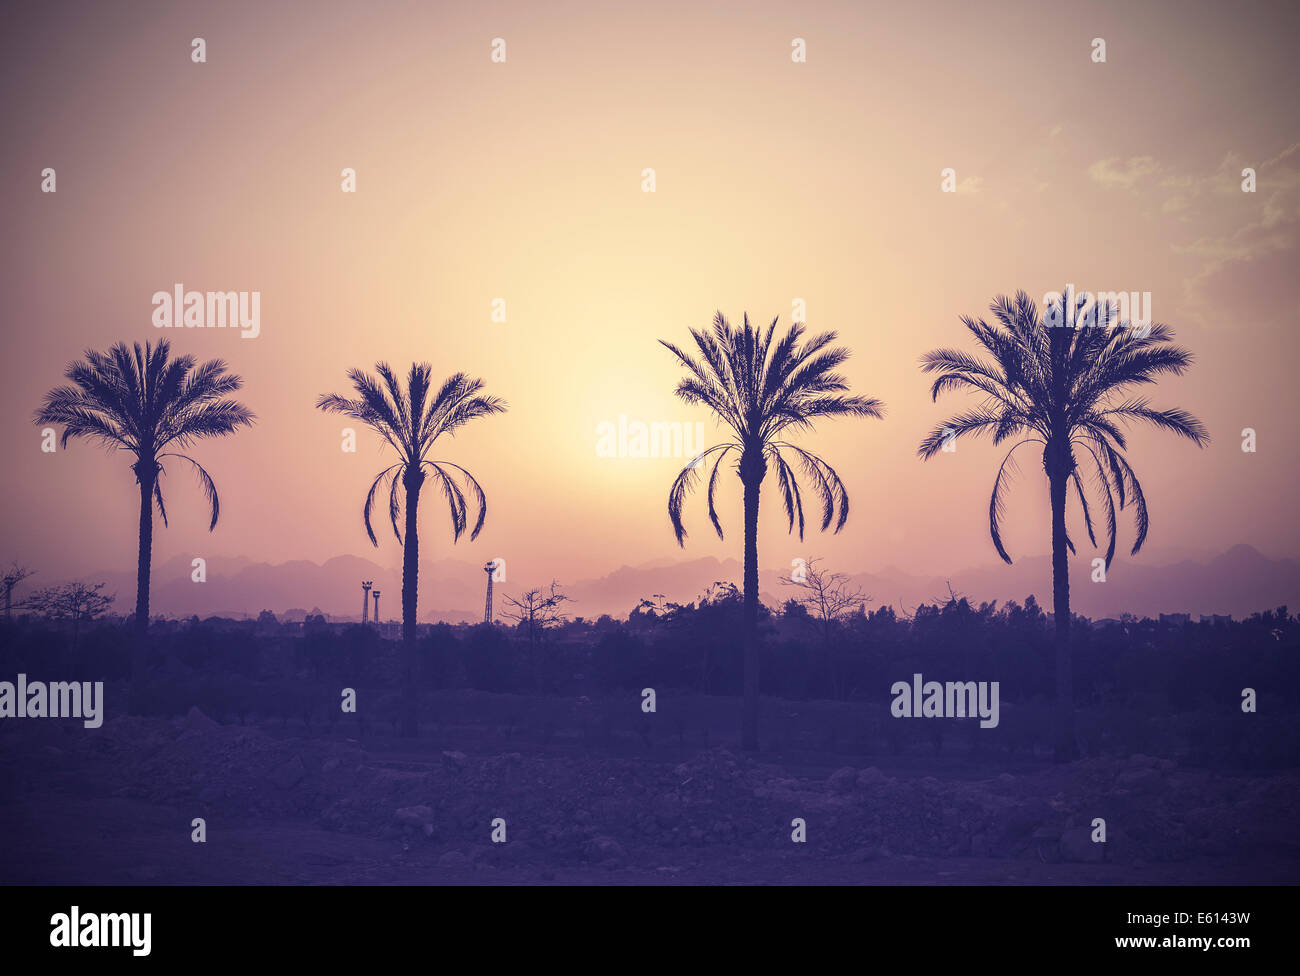 Vintage stylized palm trees silhouettes at sunset. Stock Photo